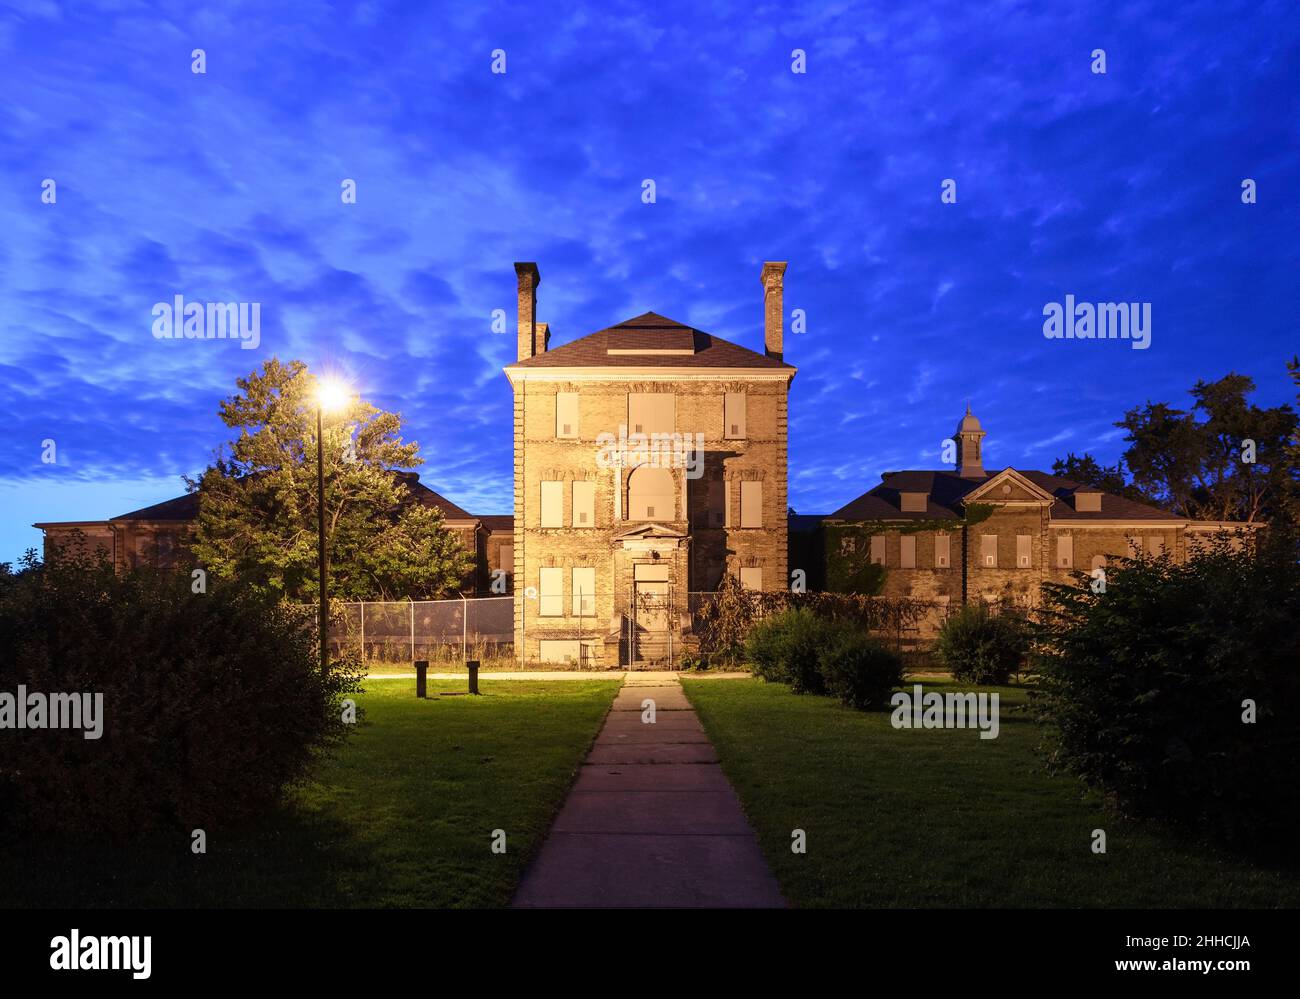 The Infirmiry?Exam Building at the London Psychiatric Hospital in London, Ontario, Canada. Stock Photo